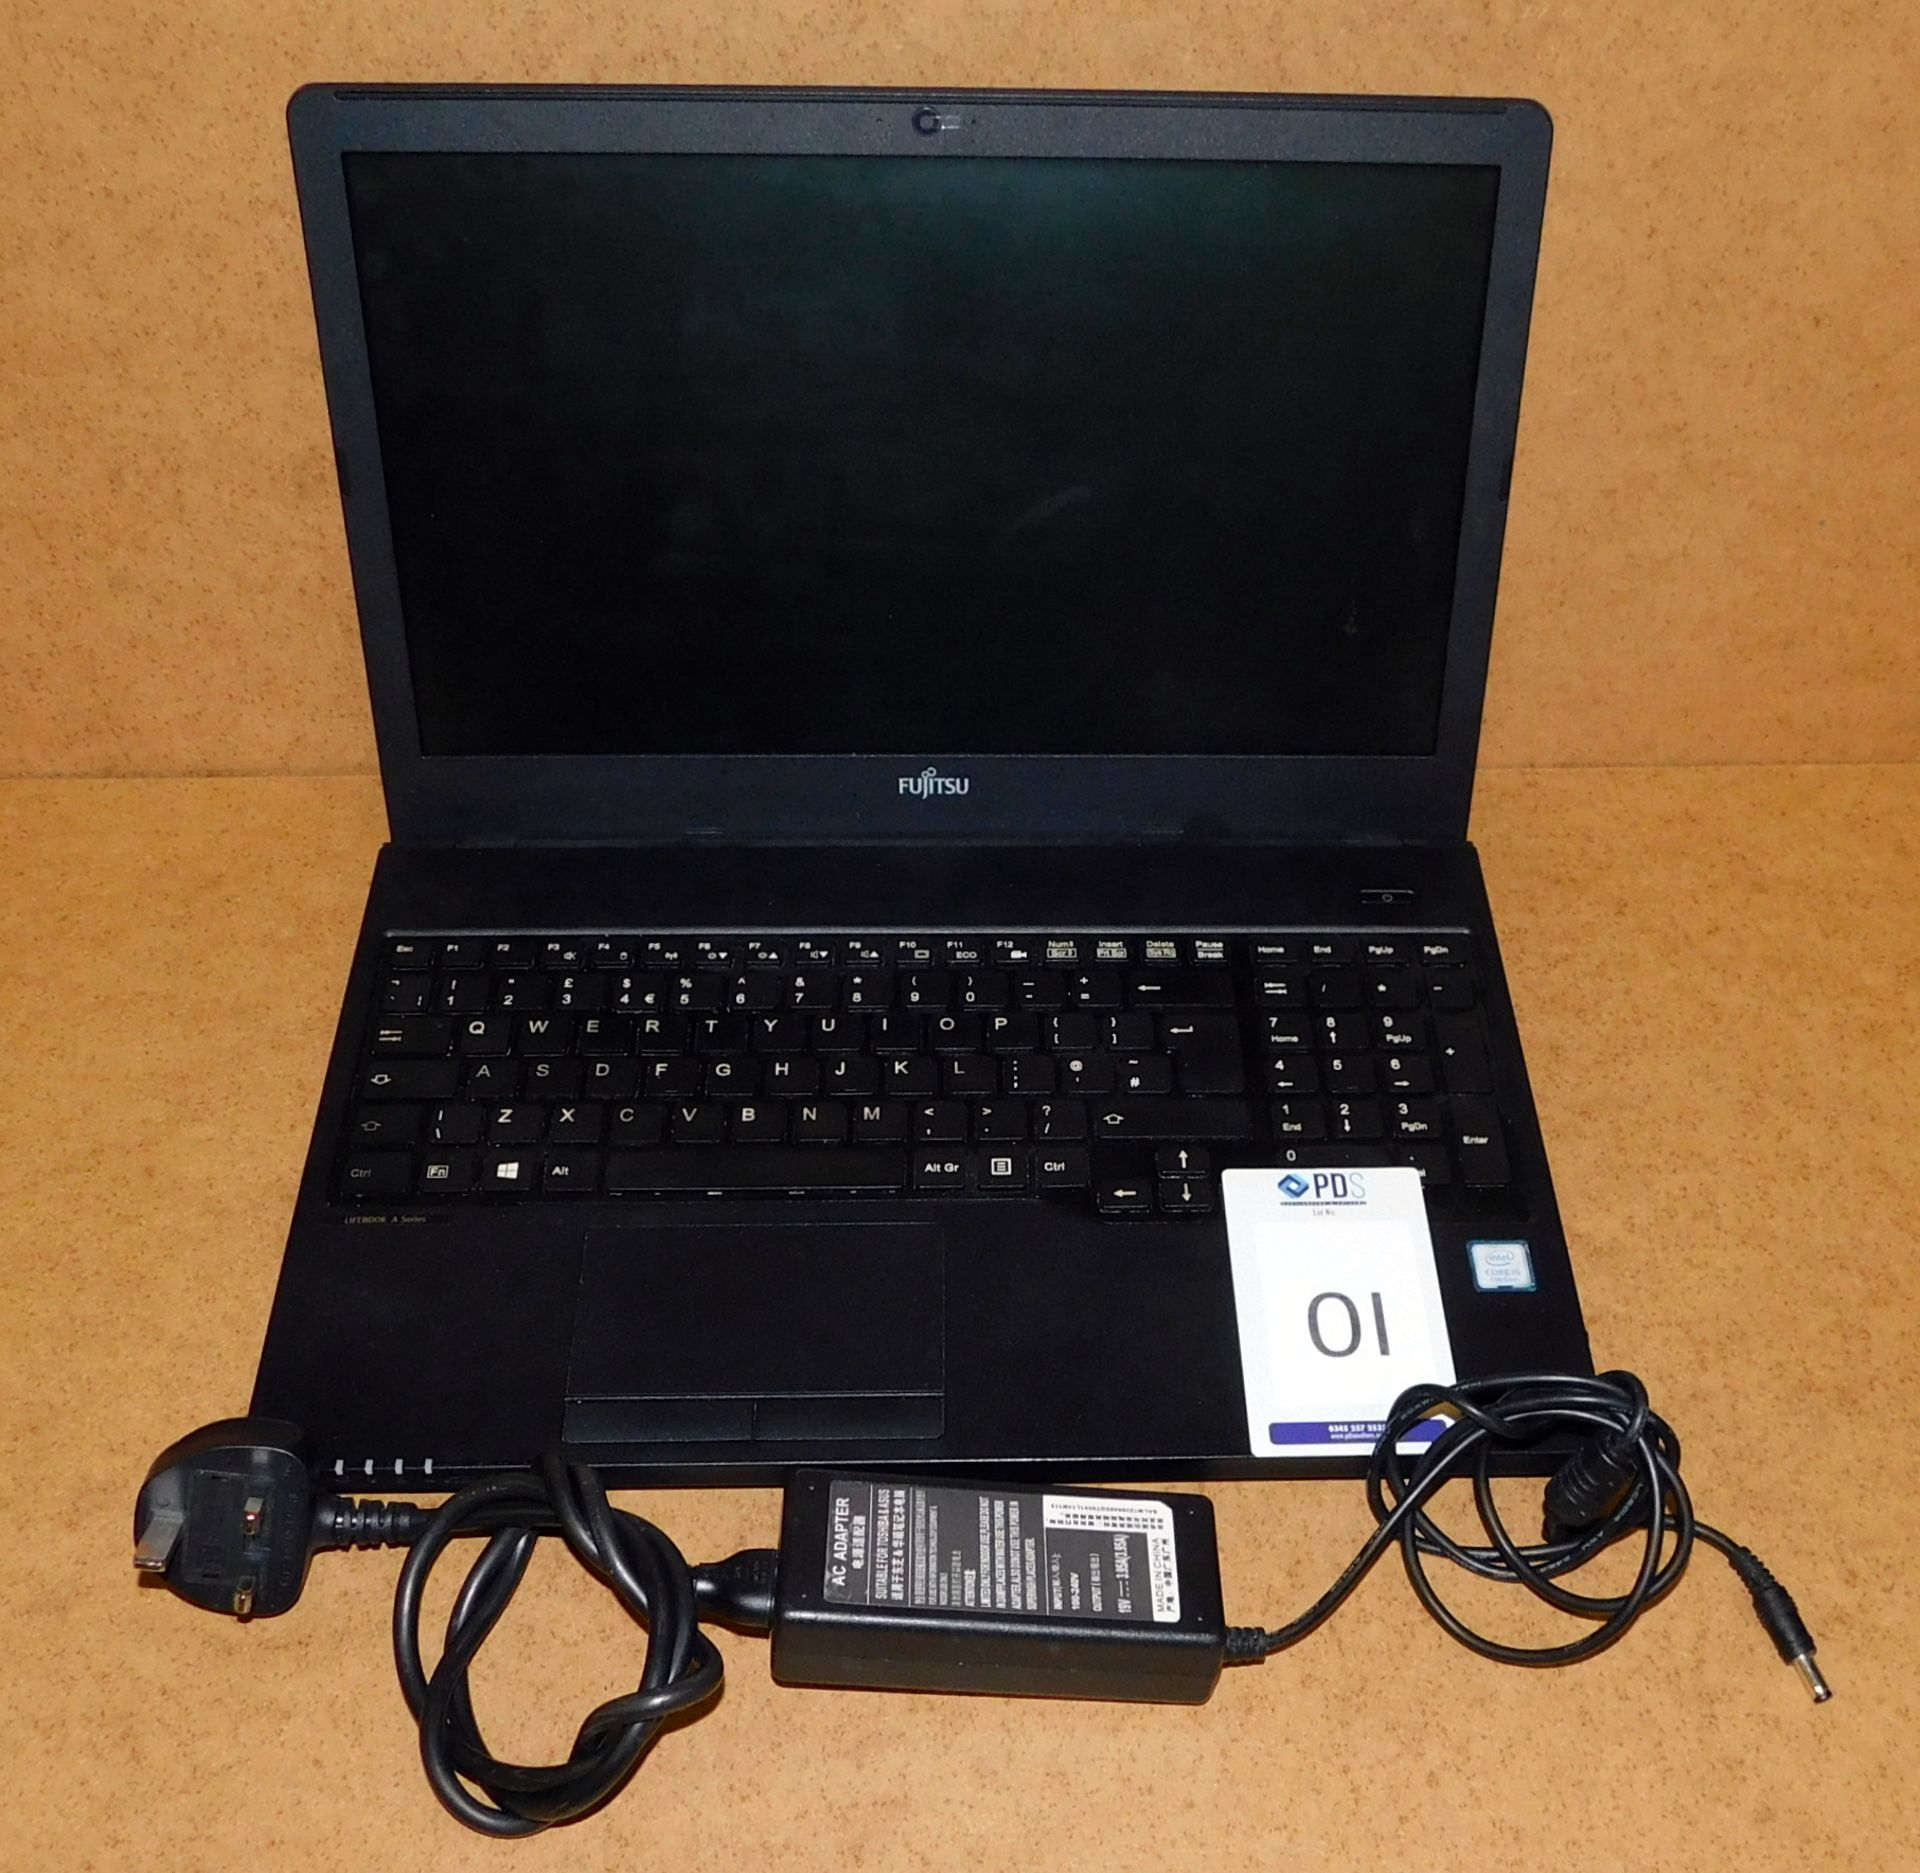 Fujitsu Lifebook A557 Laptop, i5 7th Gen Processor, 1 TB HDD with Charger